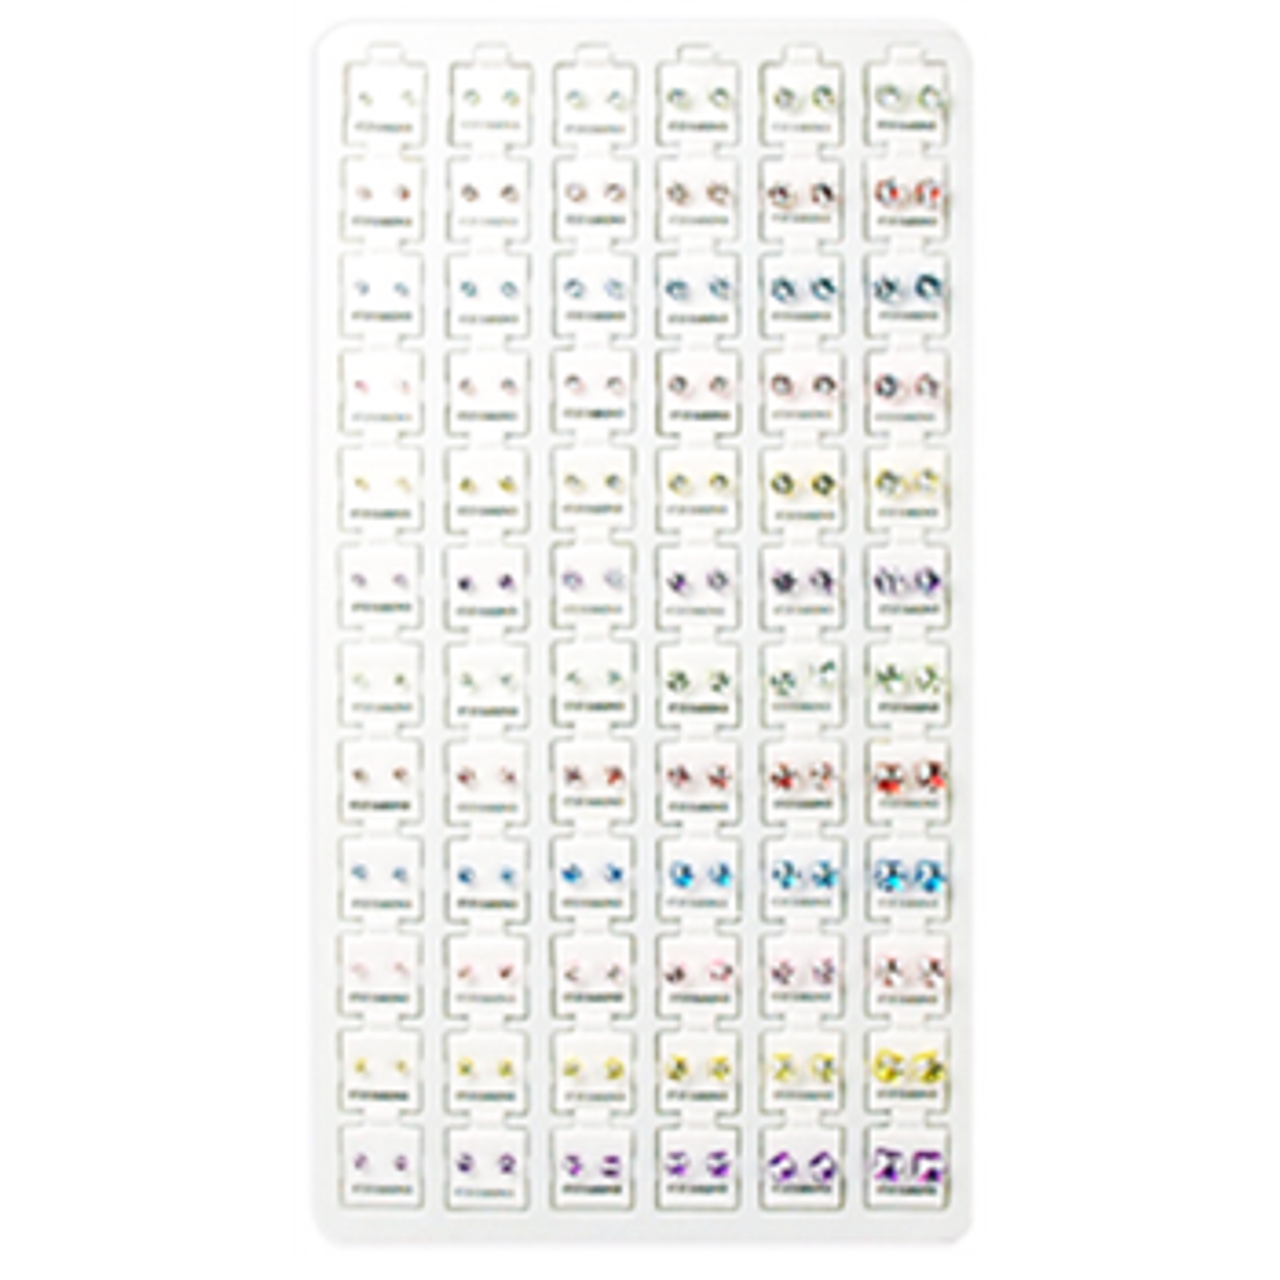 Assorted Color Studs Earrings Refill Tray